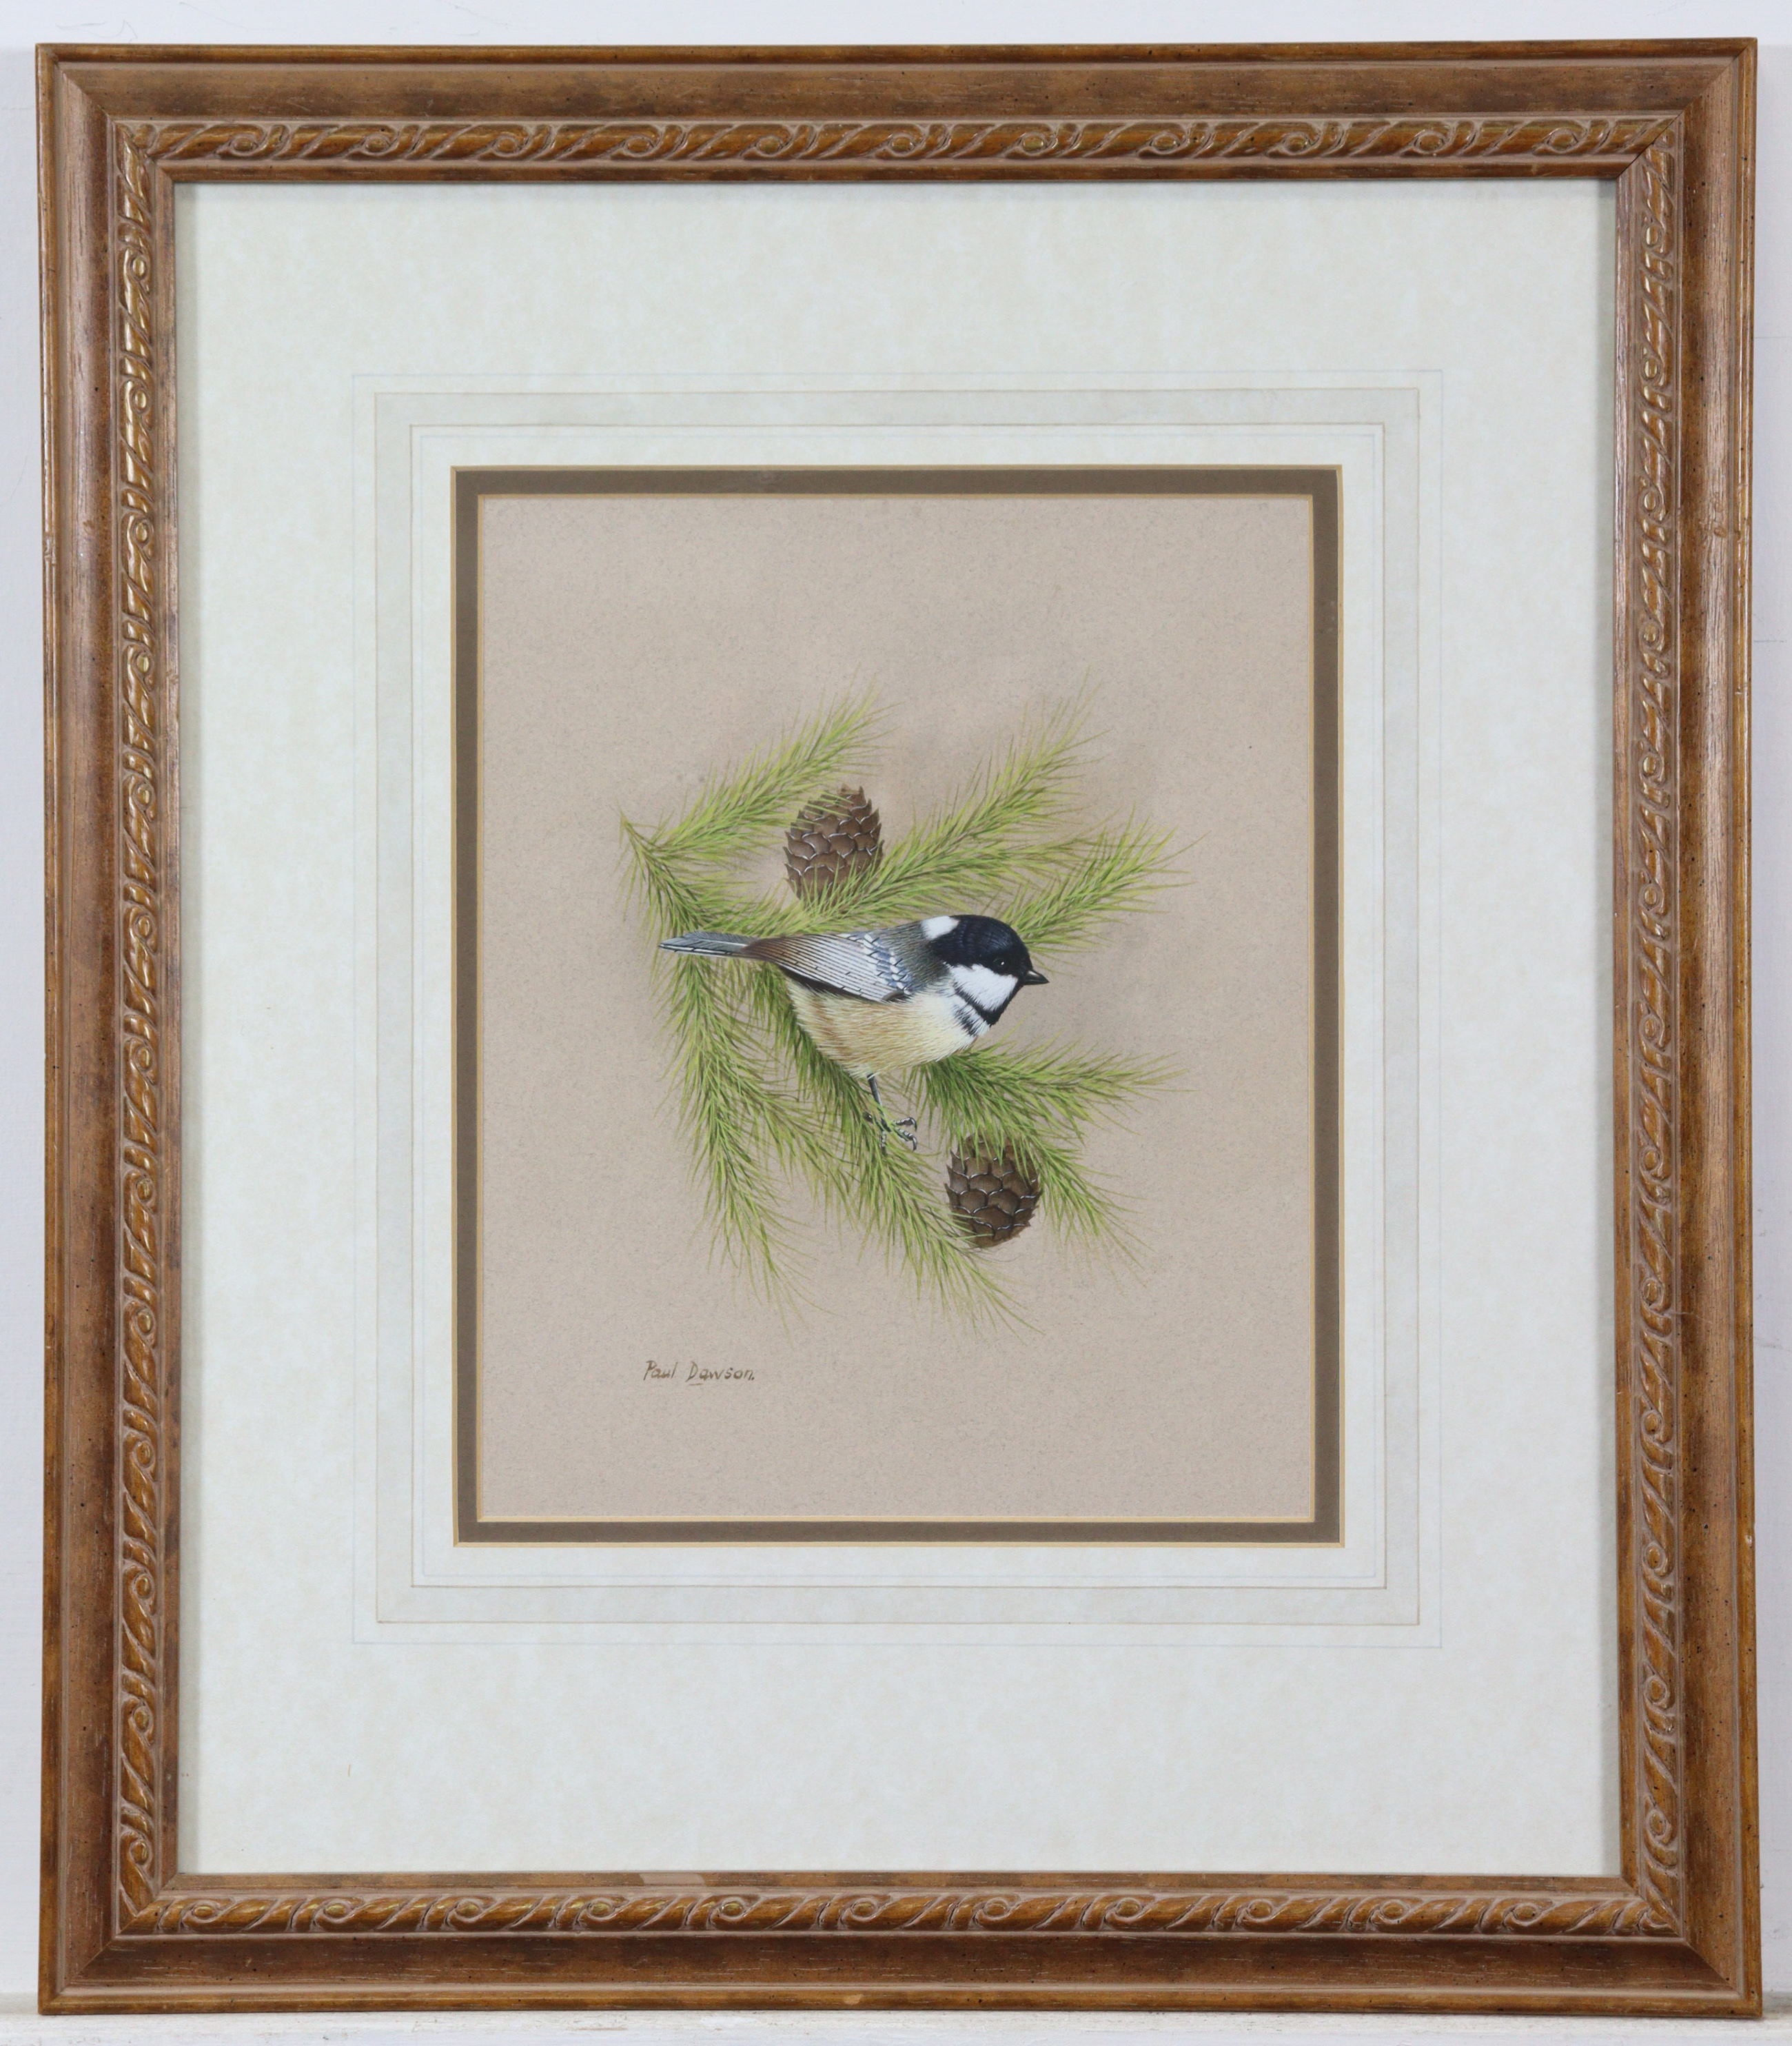 PAUL DAWSON (b. 1946) Study of a coal tit amongst pines, signed, Watercolour: 9½” x 7½”, framed & - Image 2 of 2